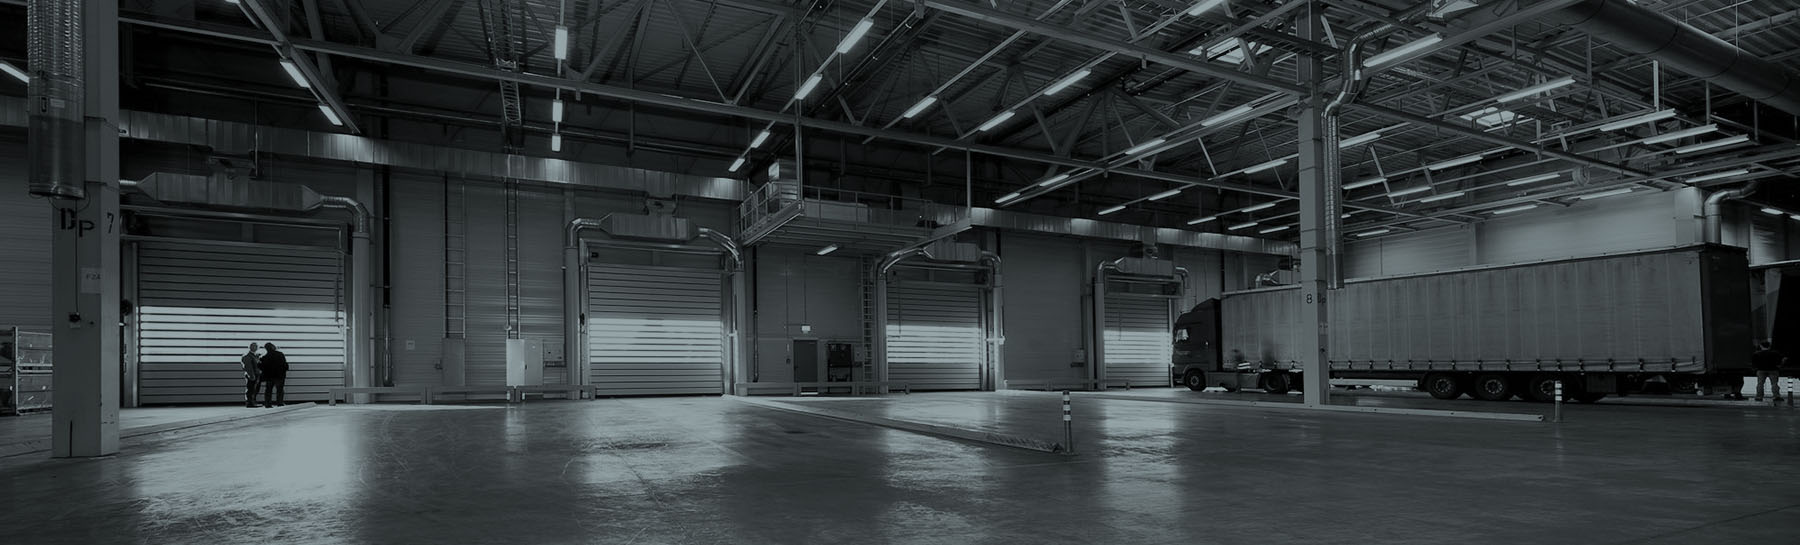 The interior of an industrial space where a freight car is parked - black and white image